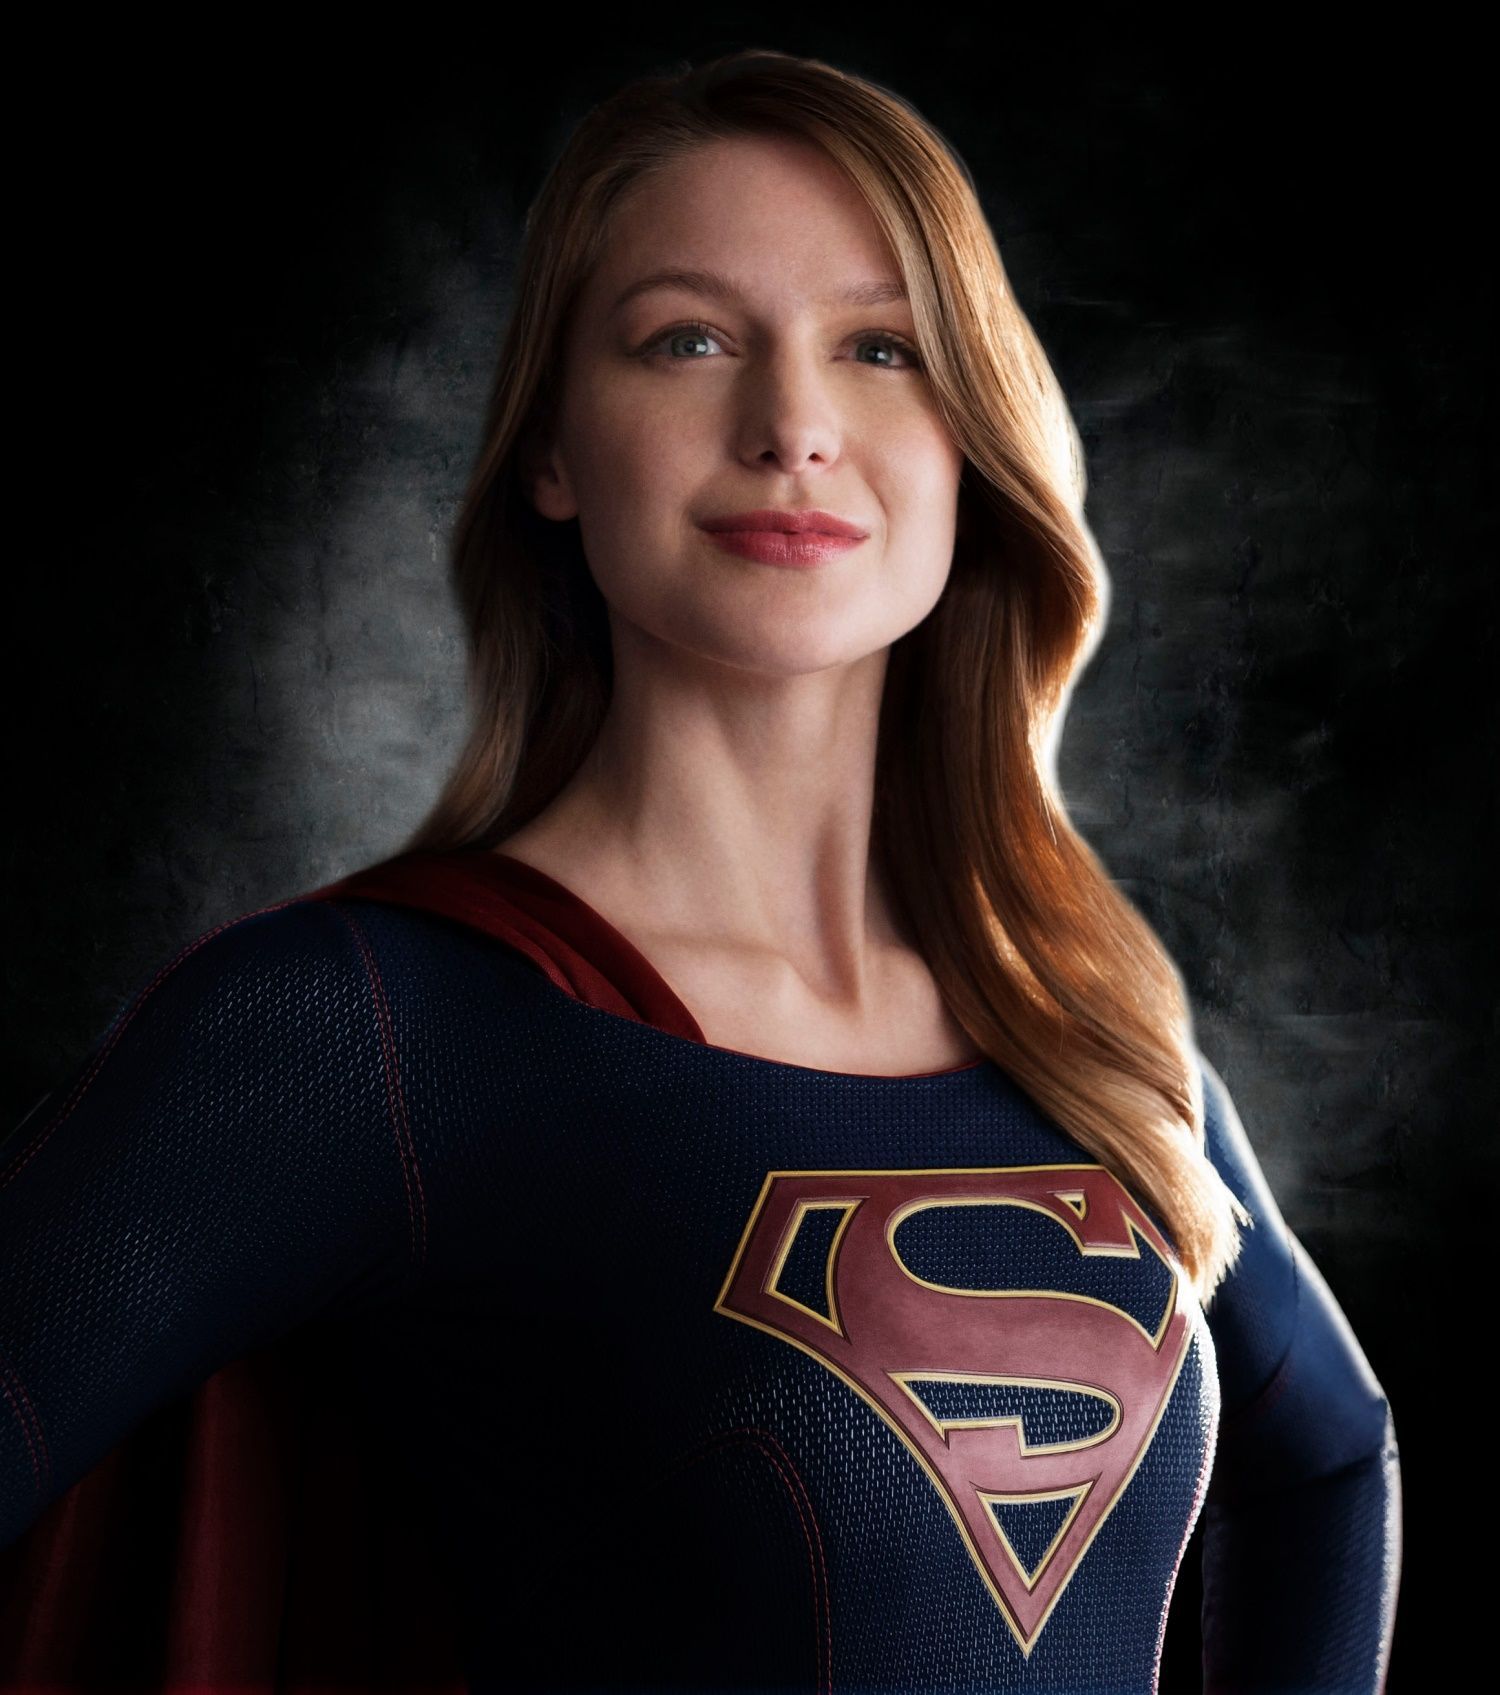 Supergirl Actress Official Images